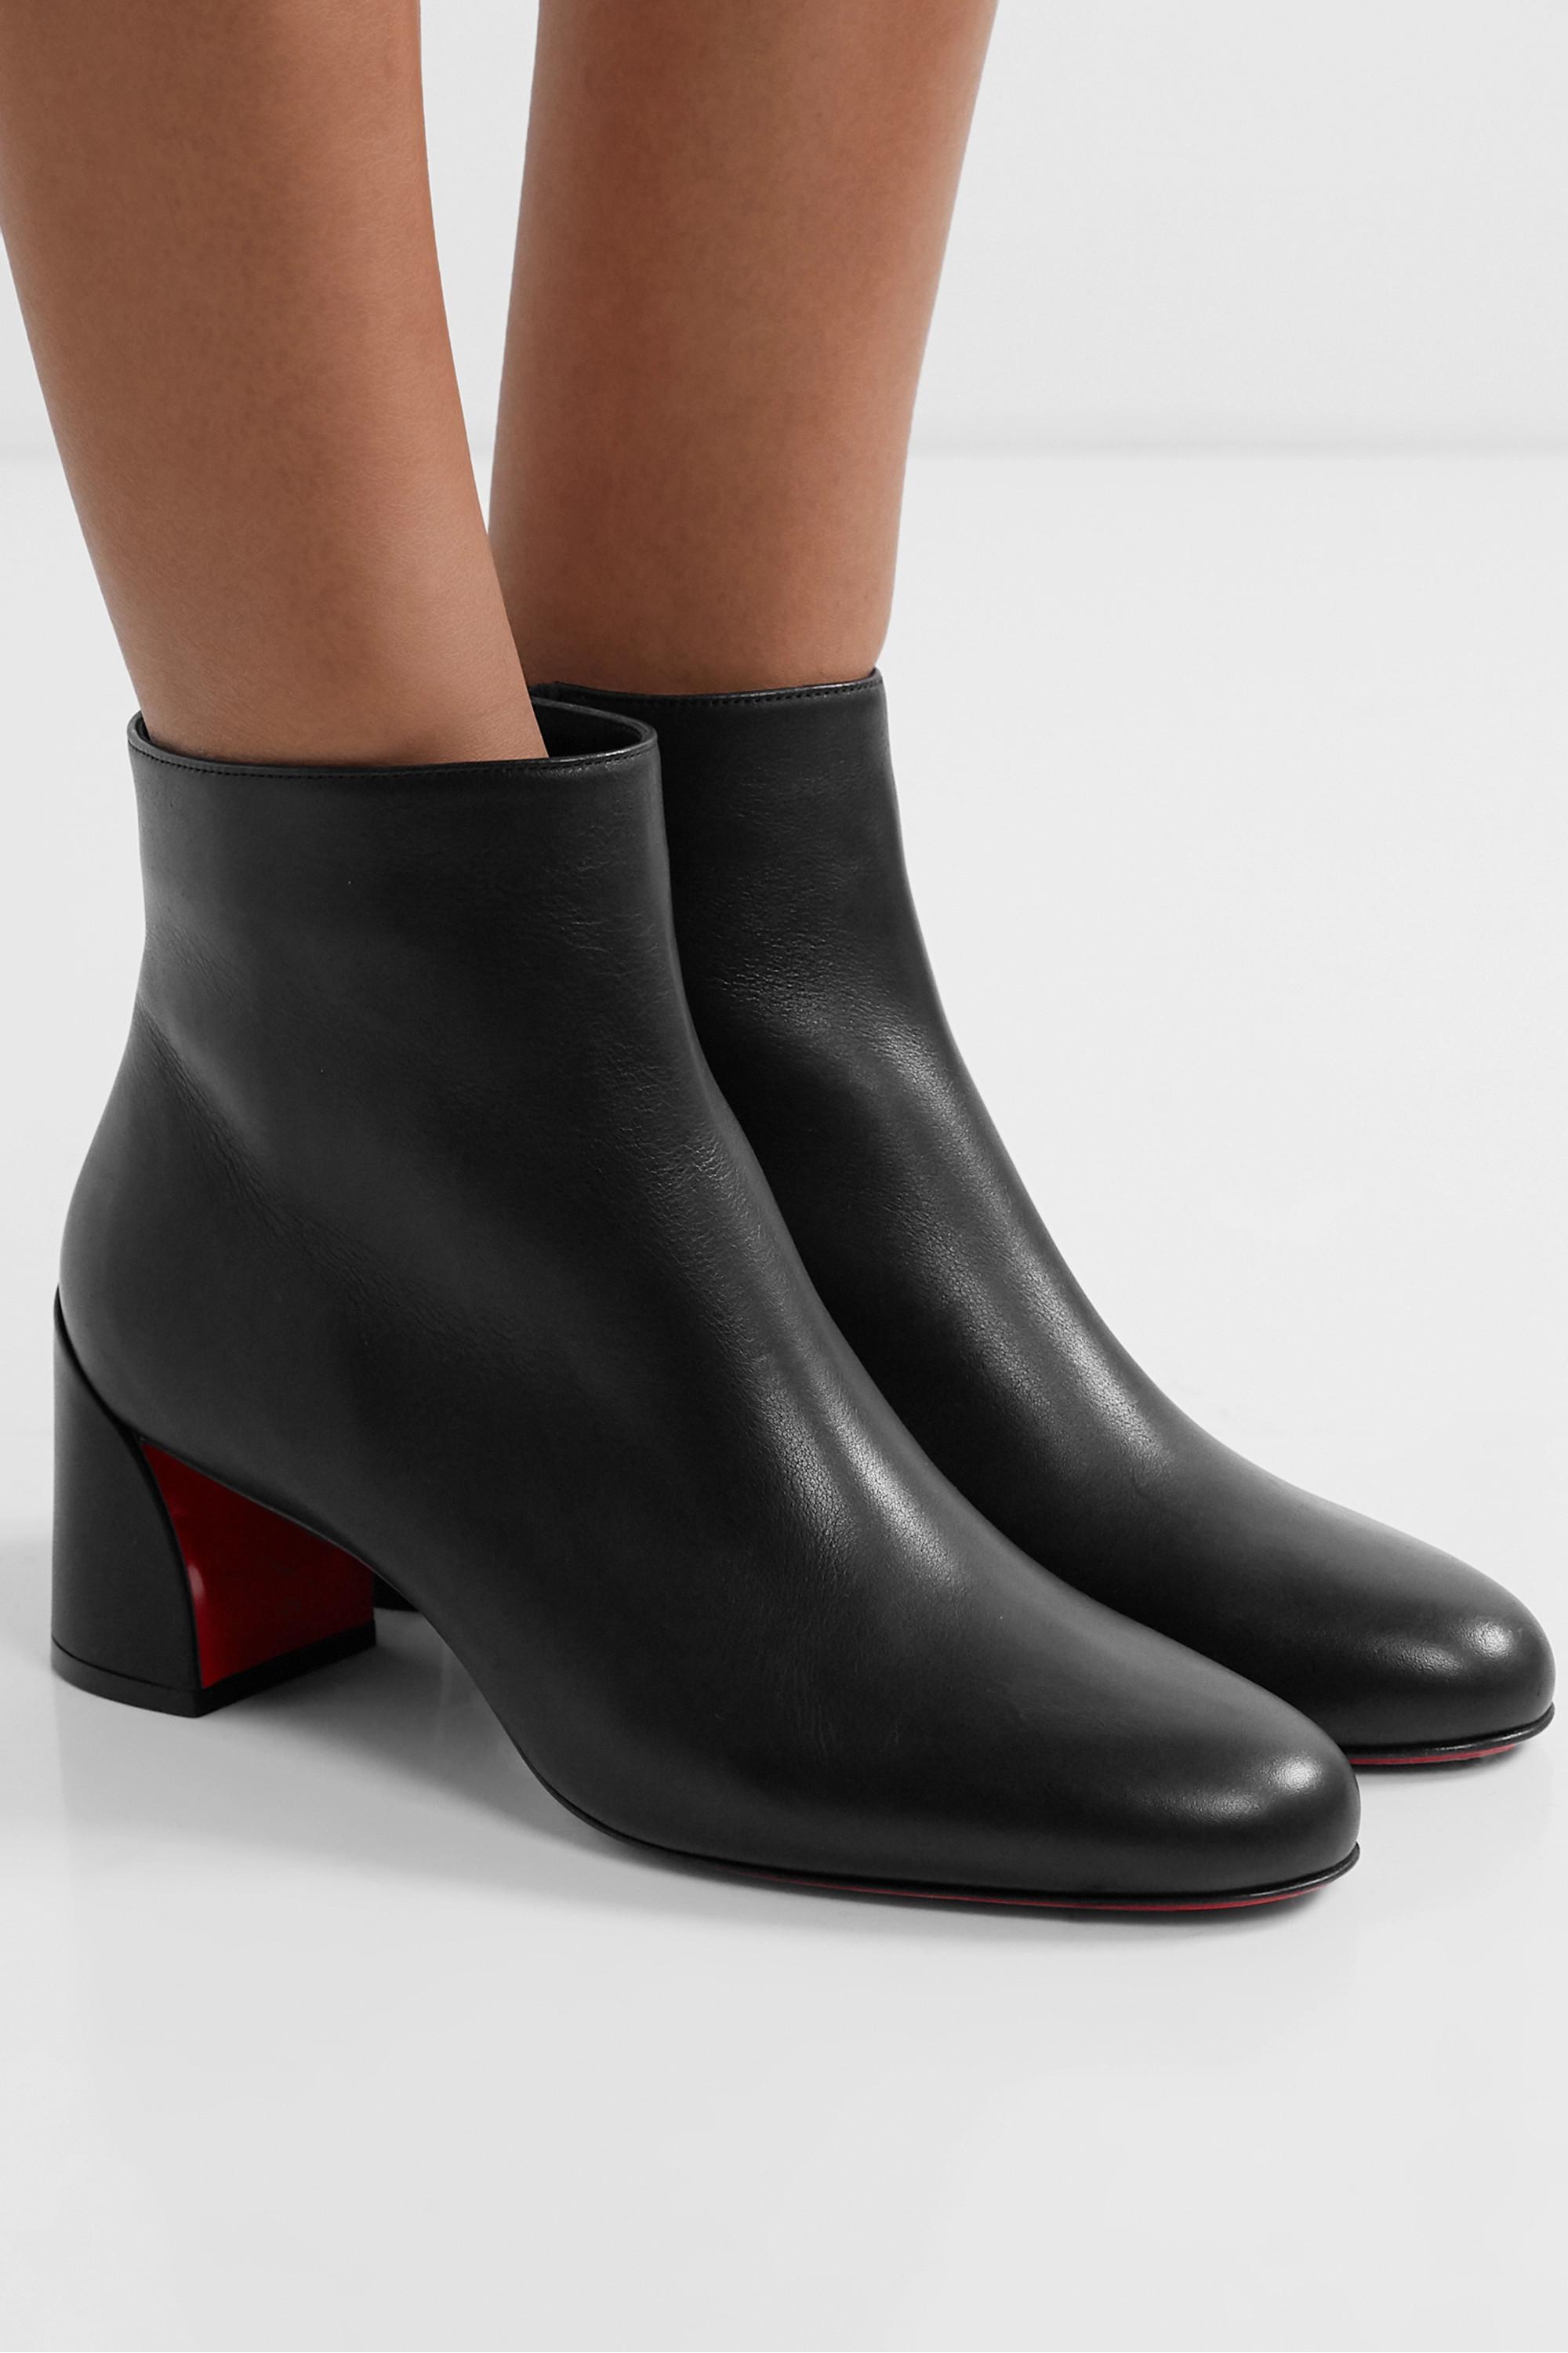 Christian Louboutin Turela 55 Leather Ankle Boots in Black - Lyst